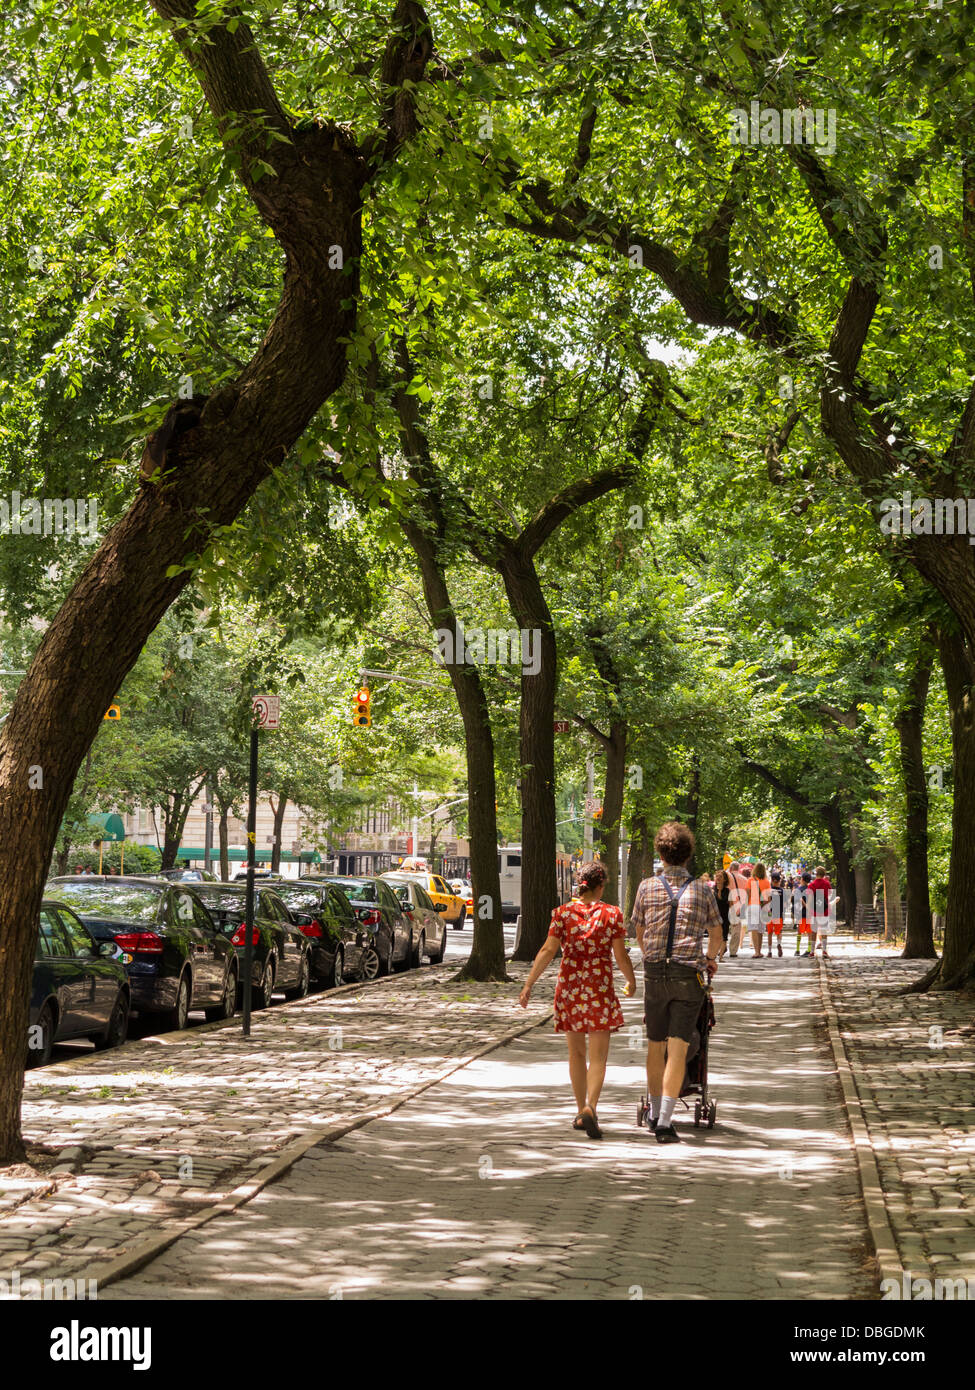 Strolling on New York street near 5th Avenue, New York City in the summer Stock Photo